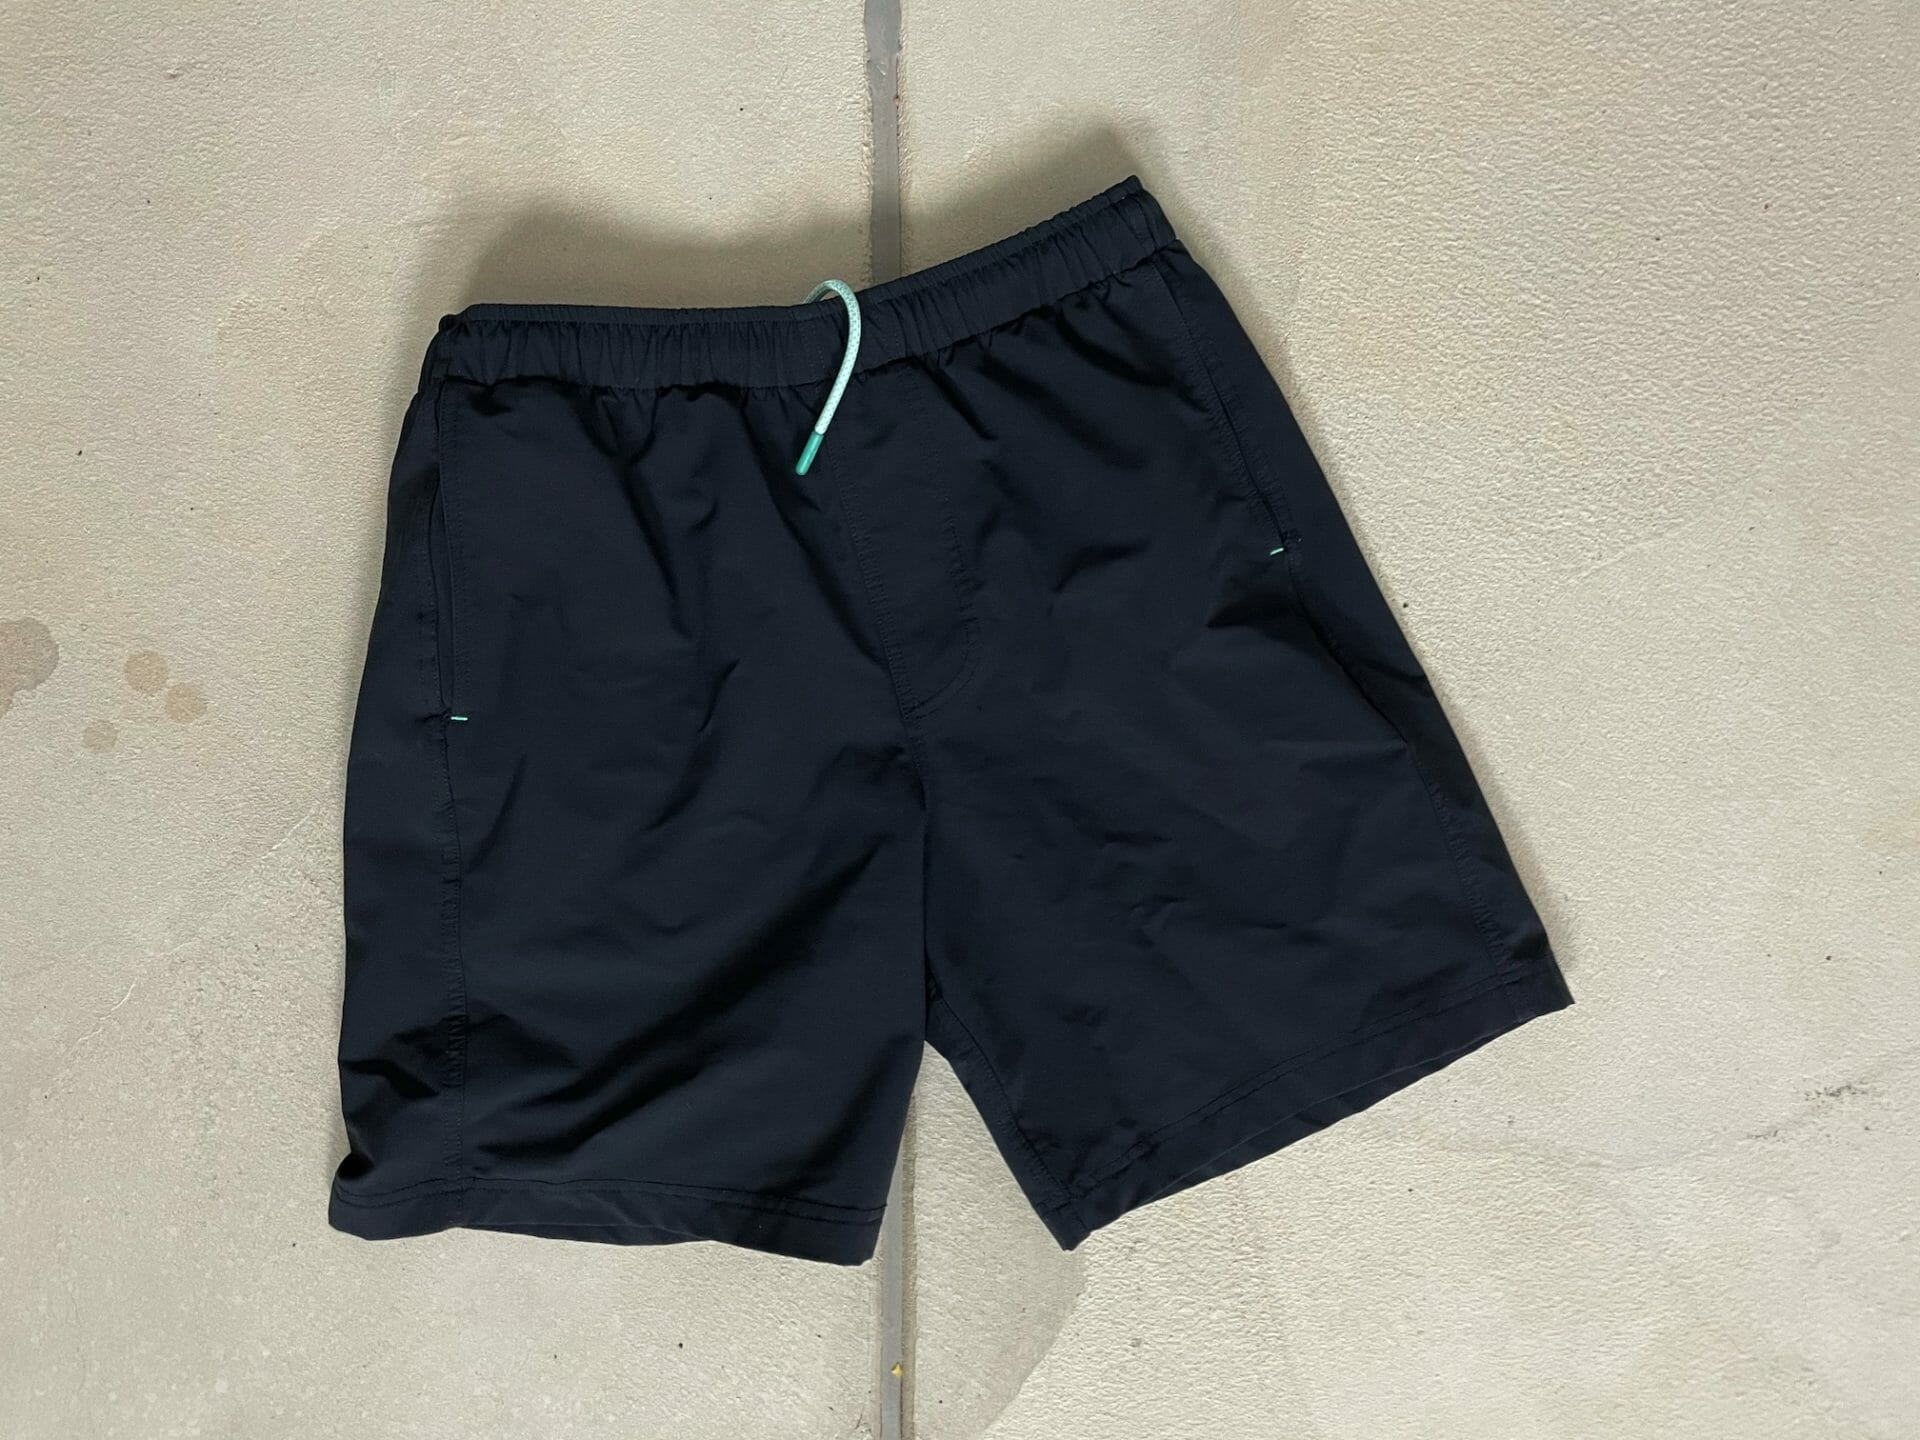 Myles Apparel Review: We Put 11+ Products To The Test!